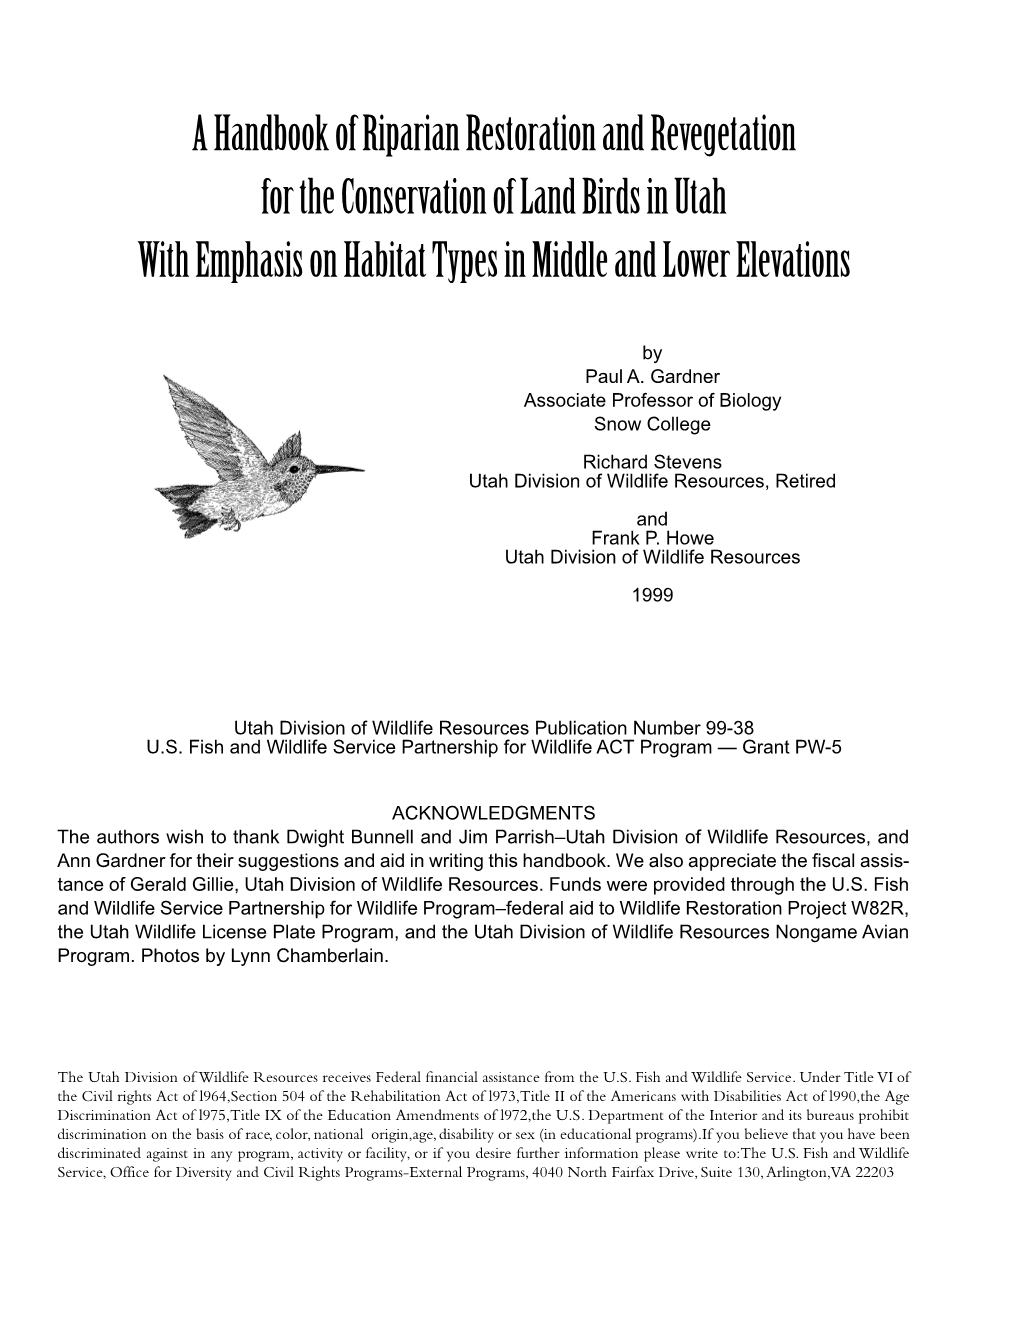 A Handbook of Riparian Restoration and Revegetation for the Conservation of Land Birds in Utah with Emphasis on Habitat Types in Middle and Lower Elevations